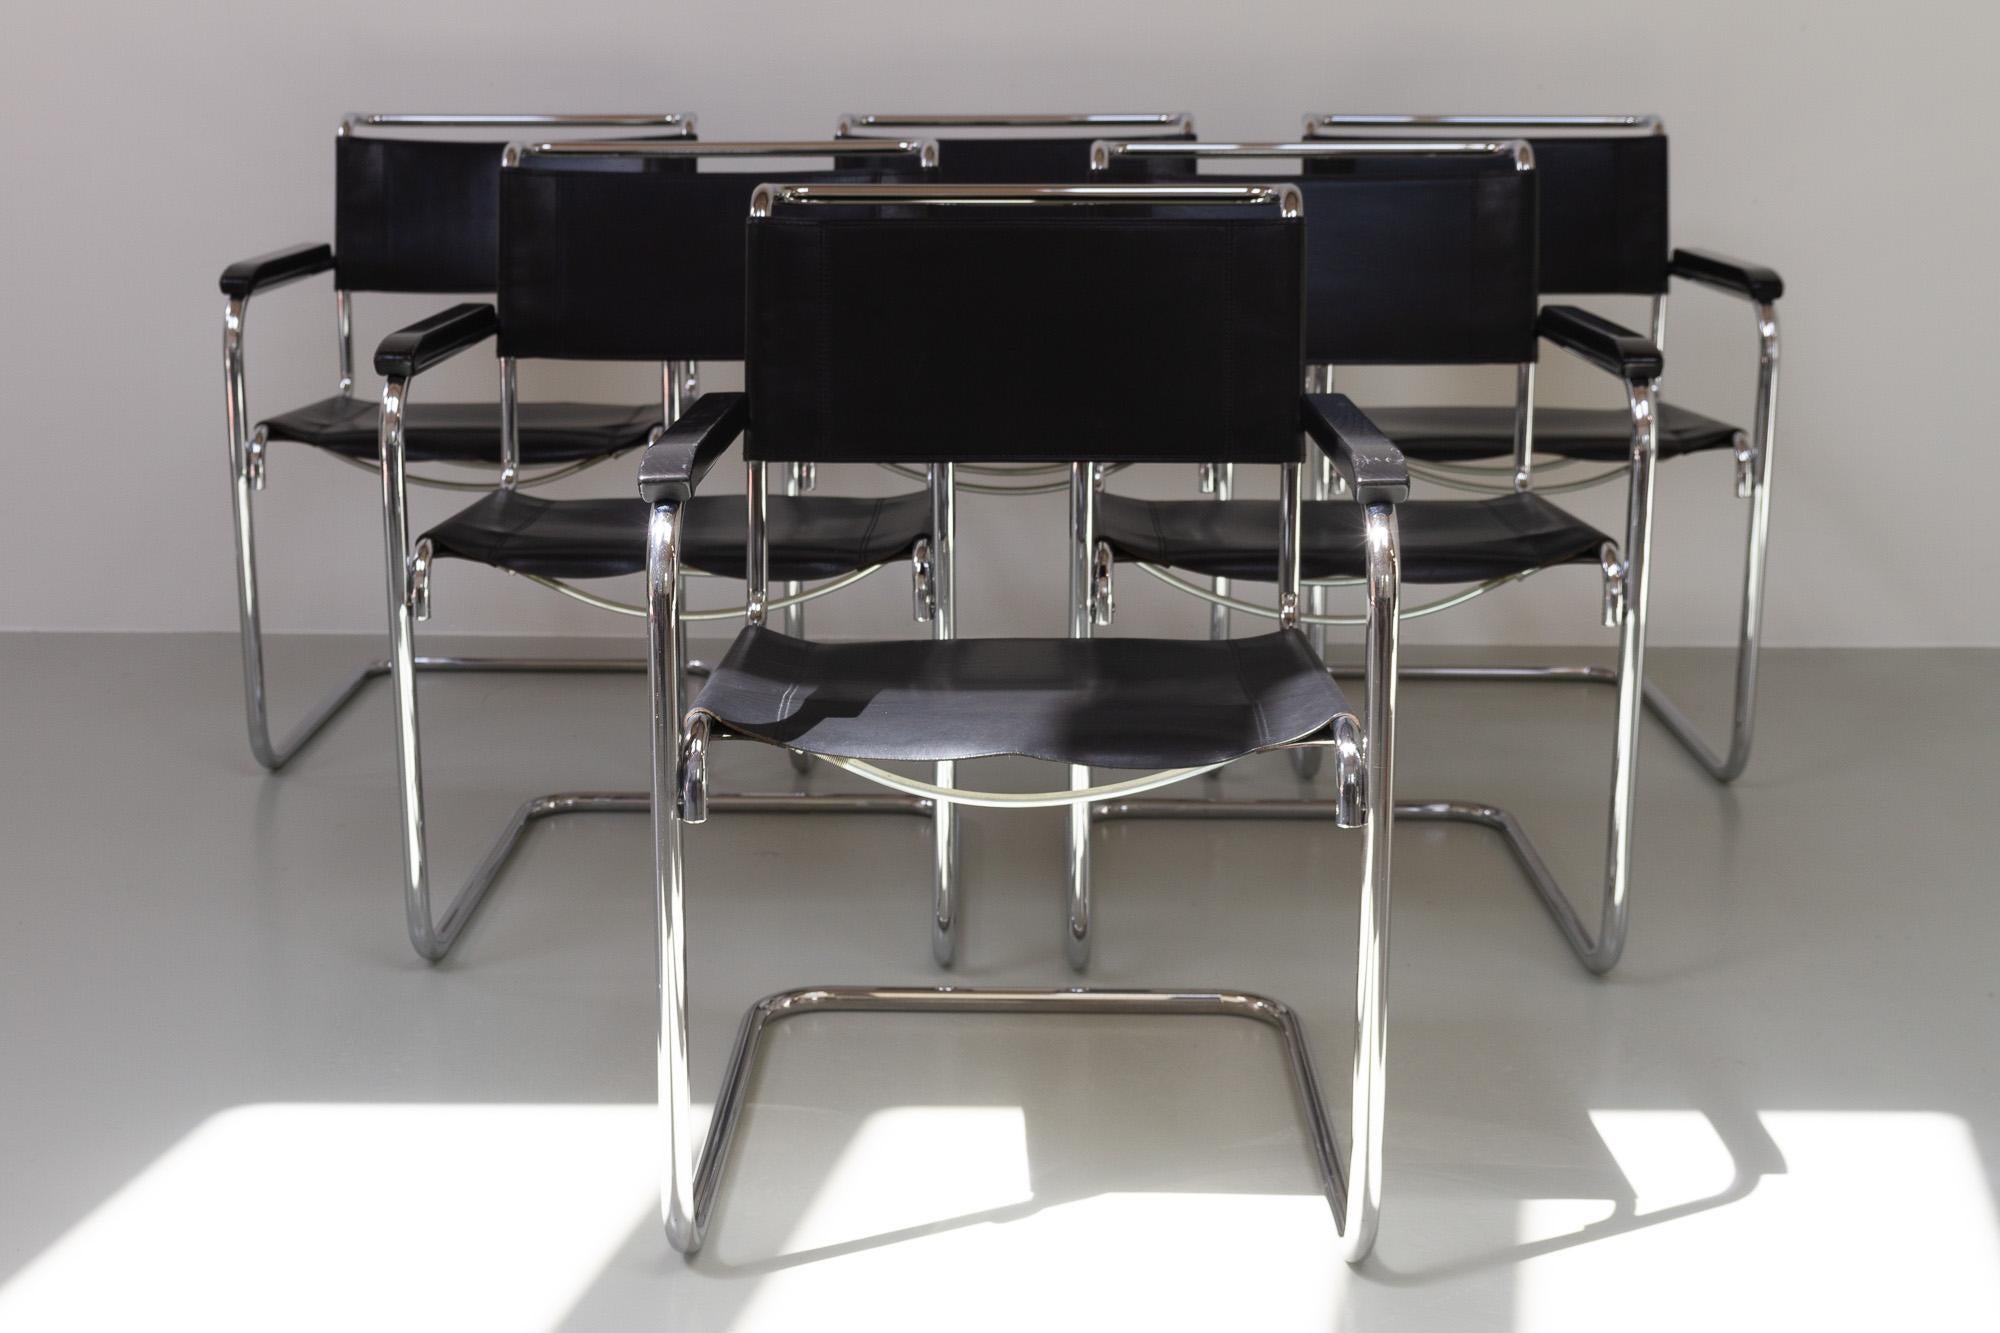 Bauhaus Vintage Cantilever Chairs S34 by Mart Stam for Thonet, 1980s. Set of 6.